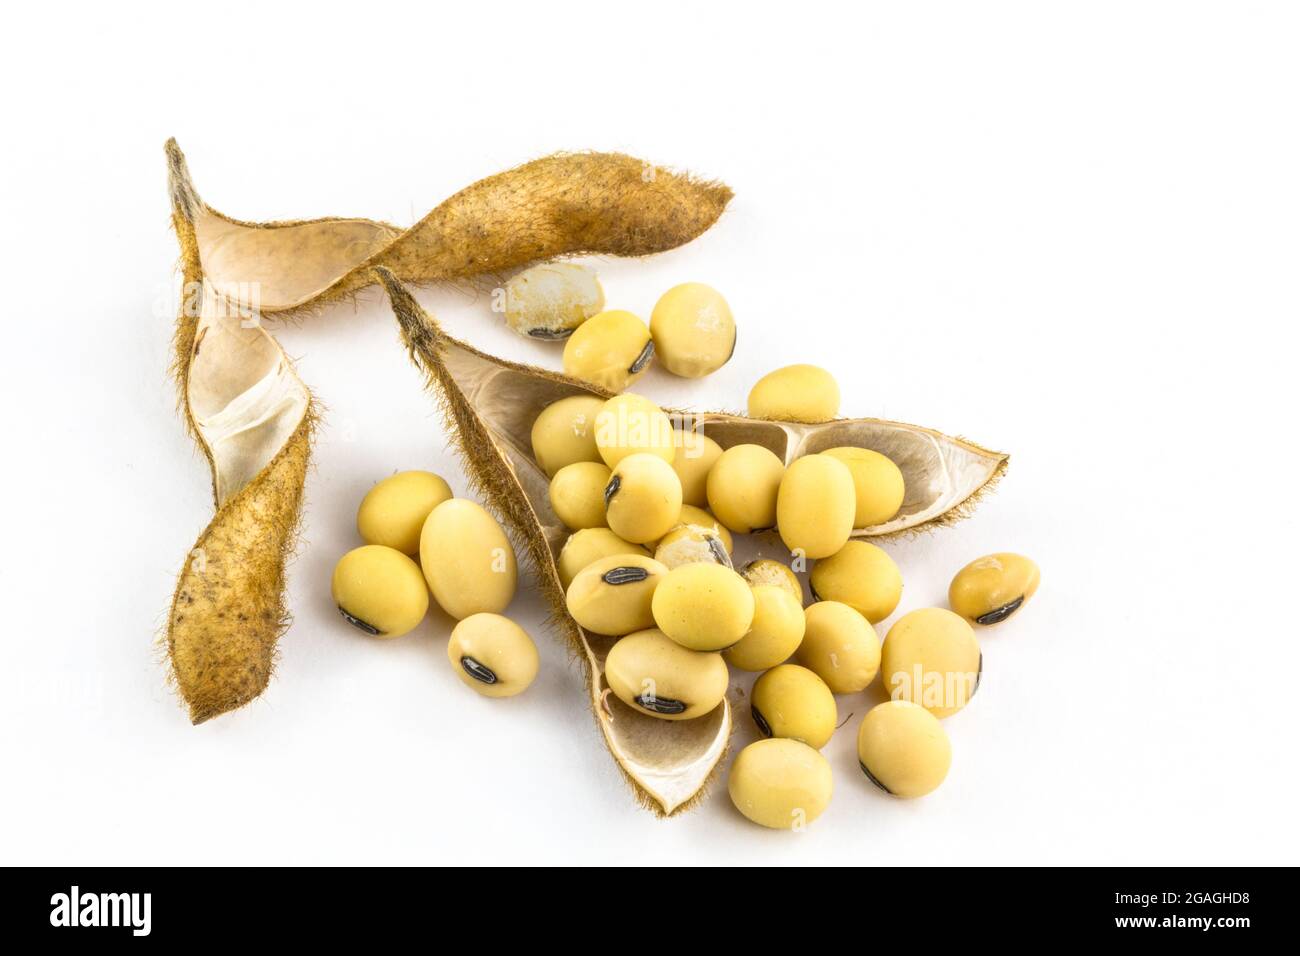 Soybeans with soya seeds stacked on a white background. Studio shot ...